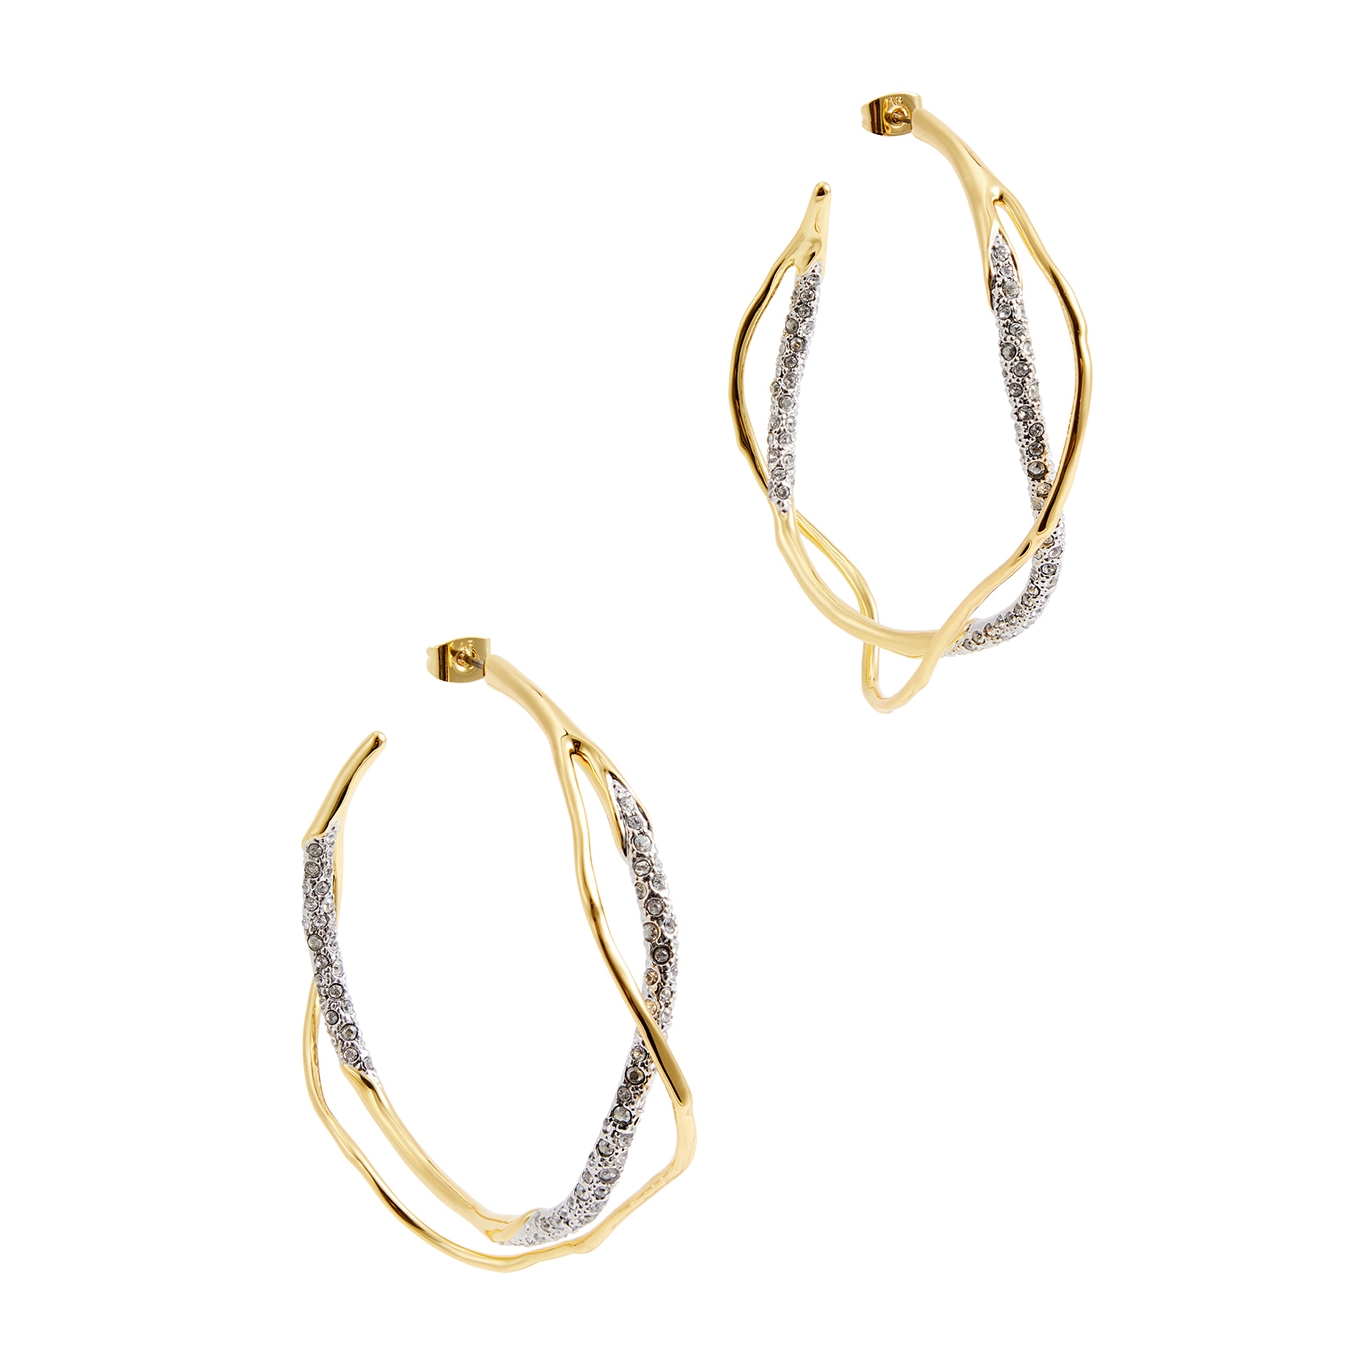 Alexis Bittar Intertwined Embellished 14kt Gold-plated Hoop Earrings